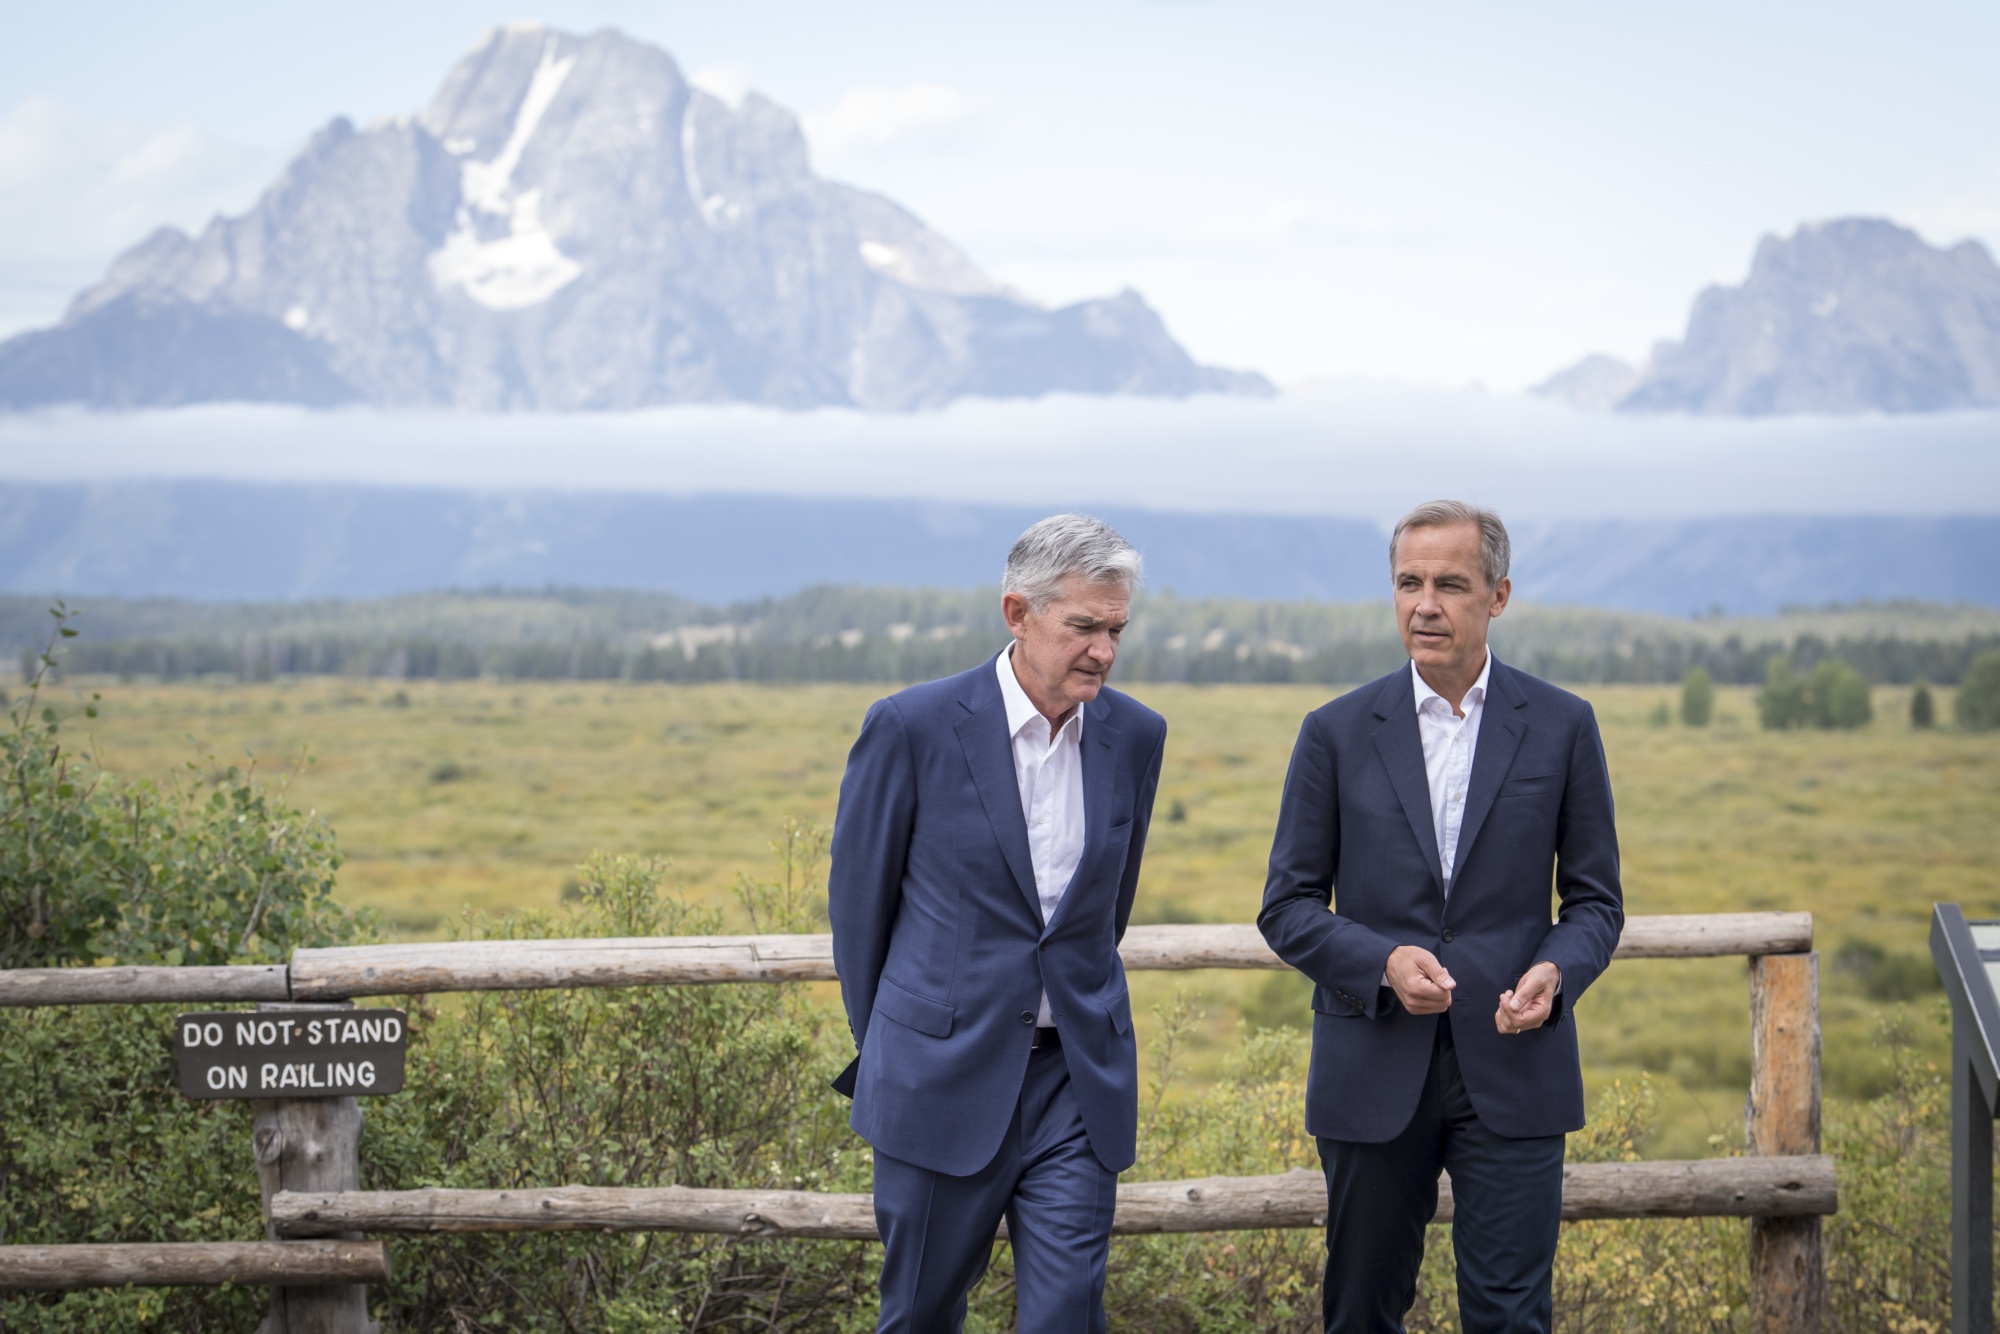 Federal Reserve Chairman Jerome Powell and Mark Carney in Jackson Hole, Wyo. on Aug. 23, 2019.